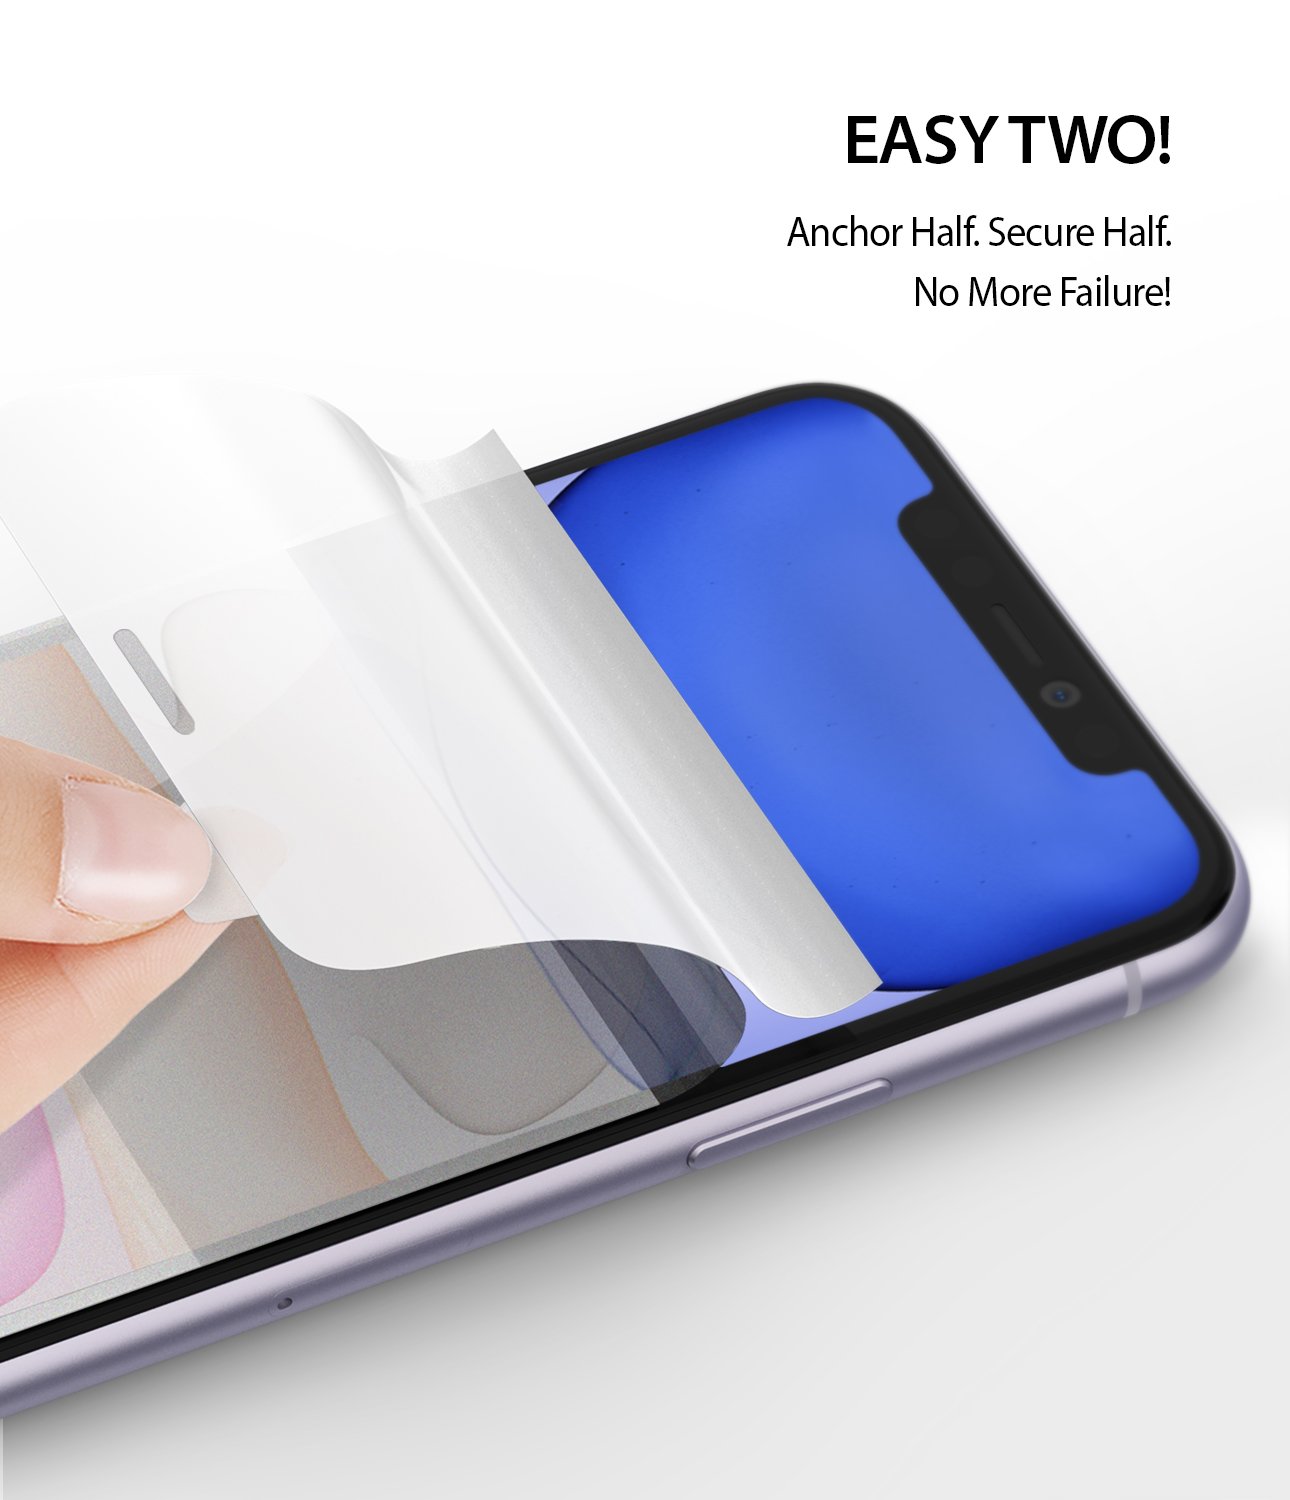 Ringke Dual Easy Film Screen Protector for iPhone 11 Easy Installation Easy Two